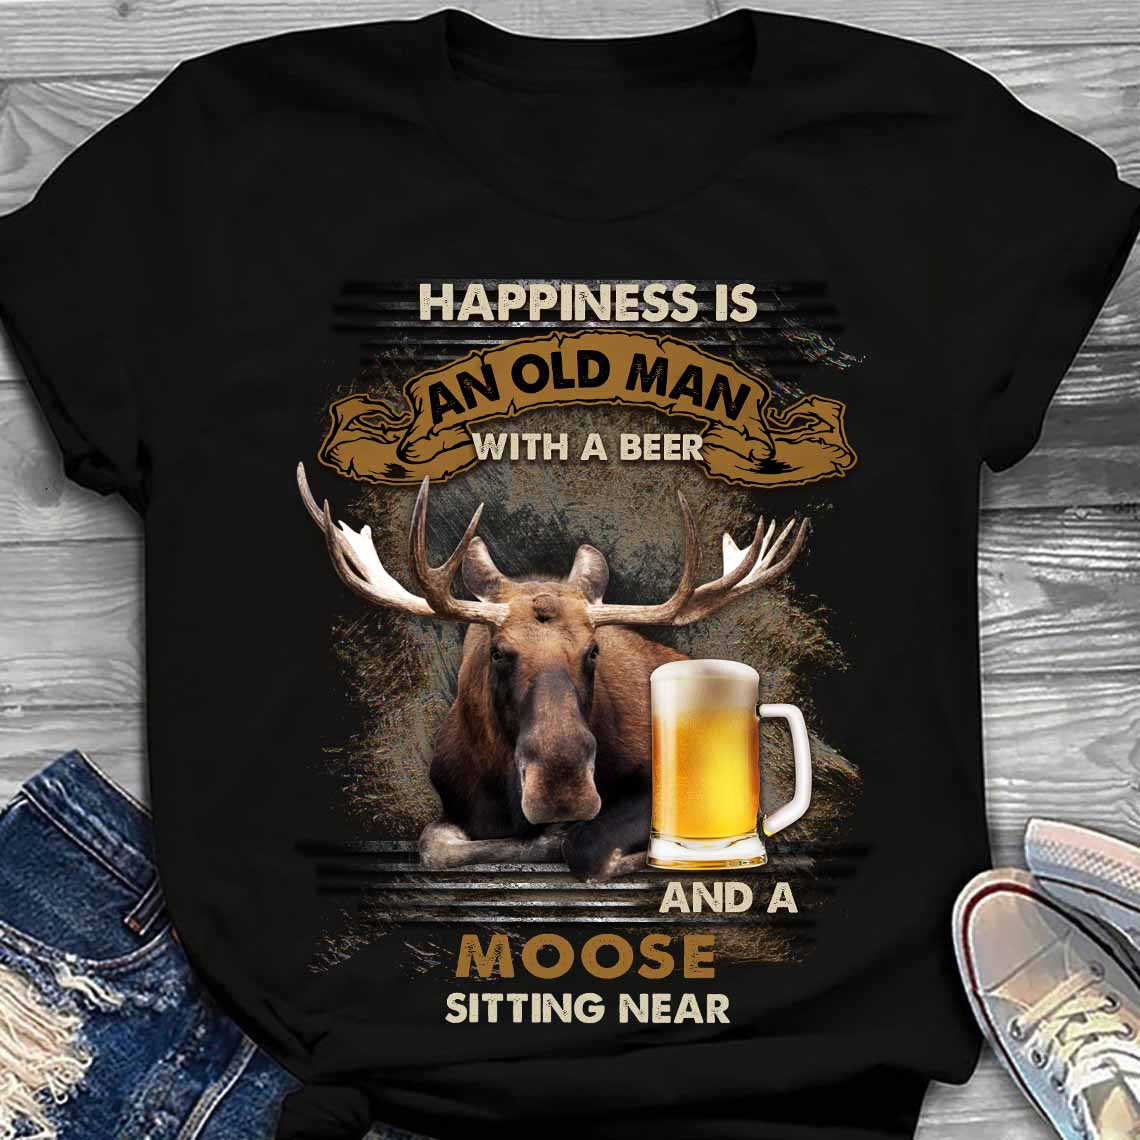 Happiness is an old man with a beer and a moose sitting near - Beer lover